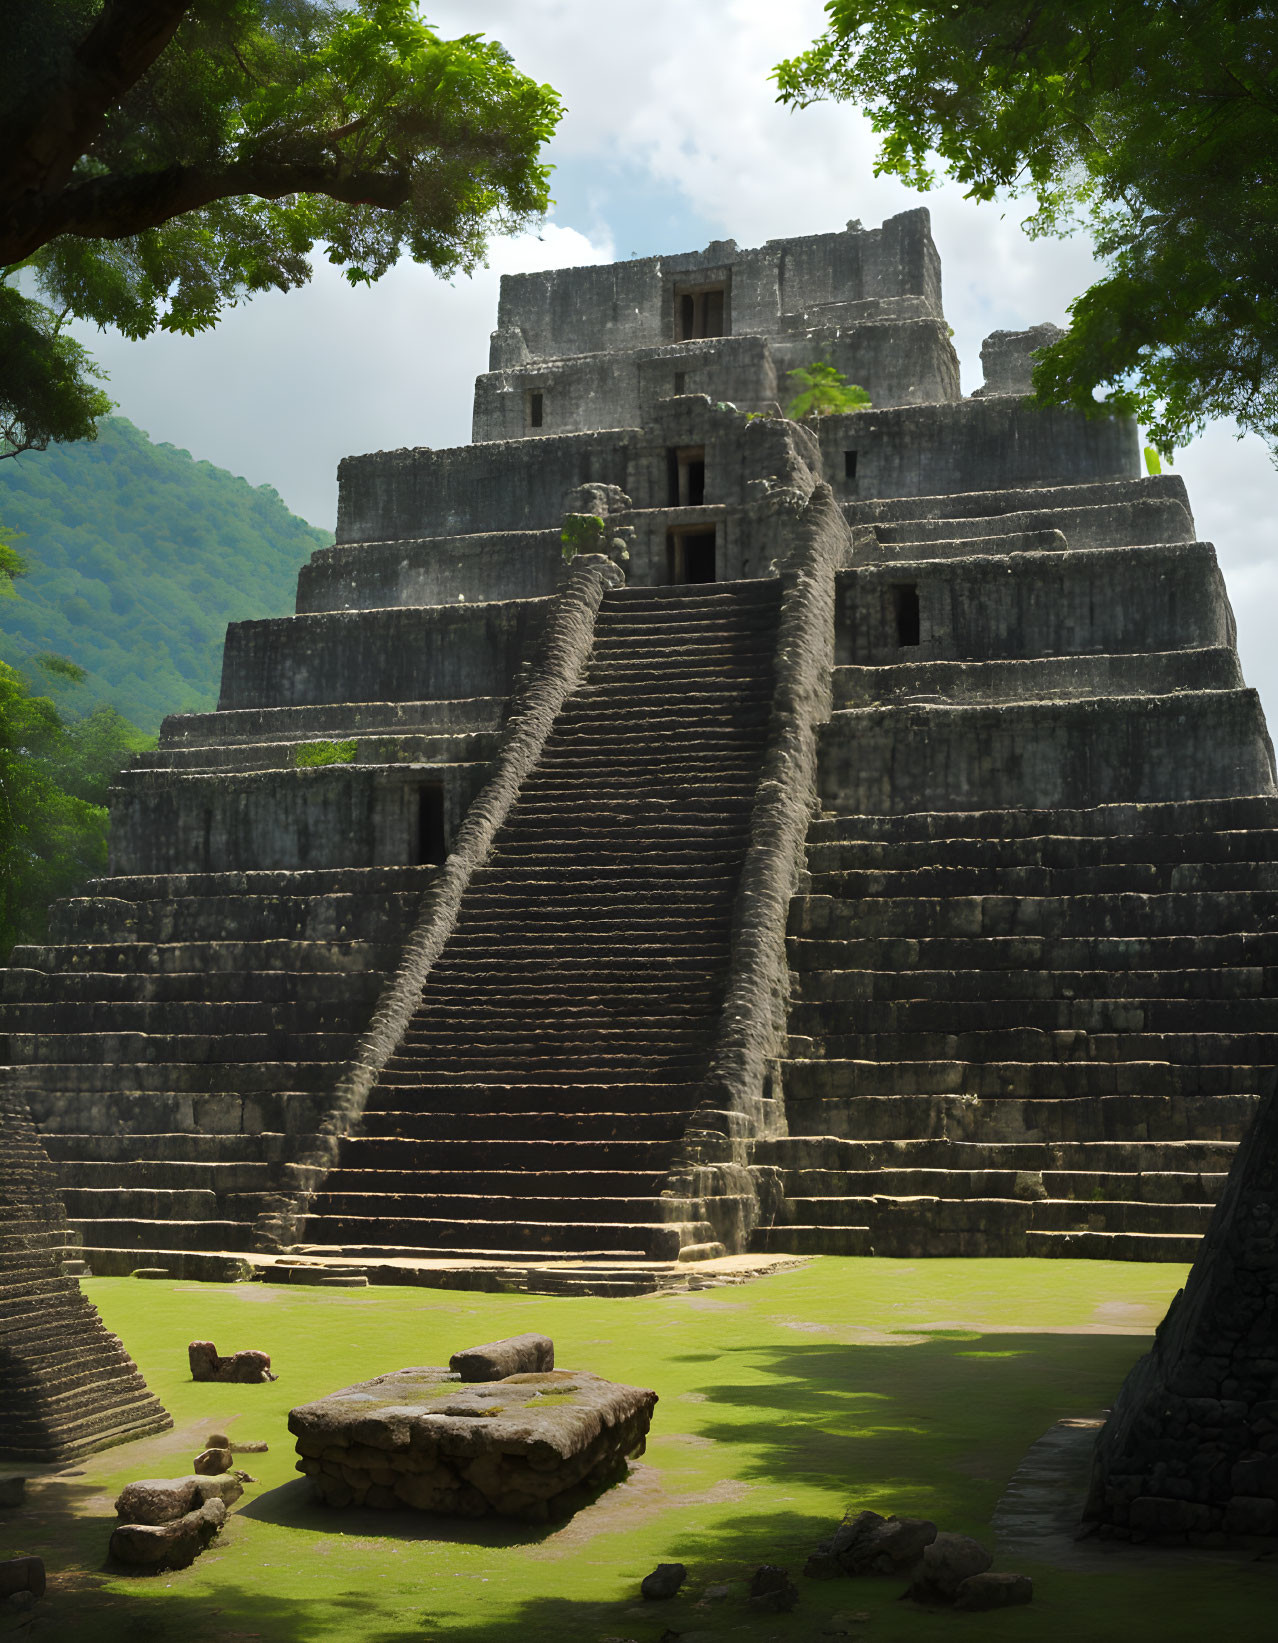 Ancient Mesoamerican Pyramid with Grand Staircase and Tree in Lush Greenery